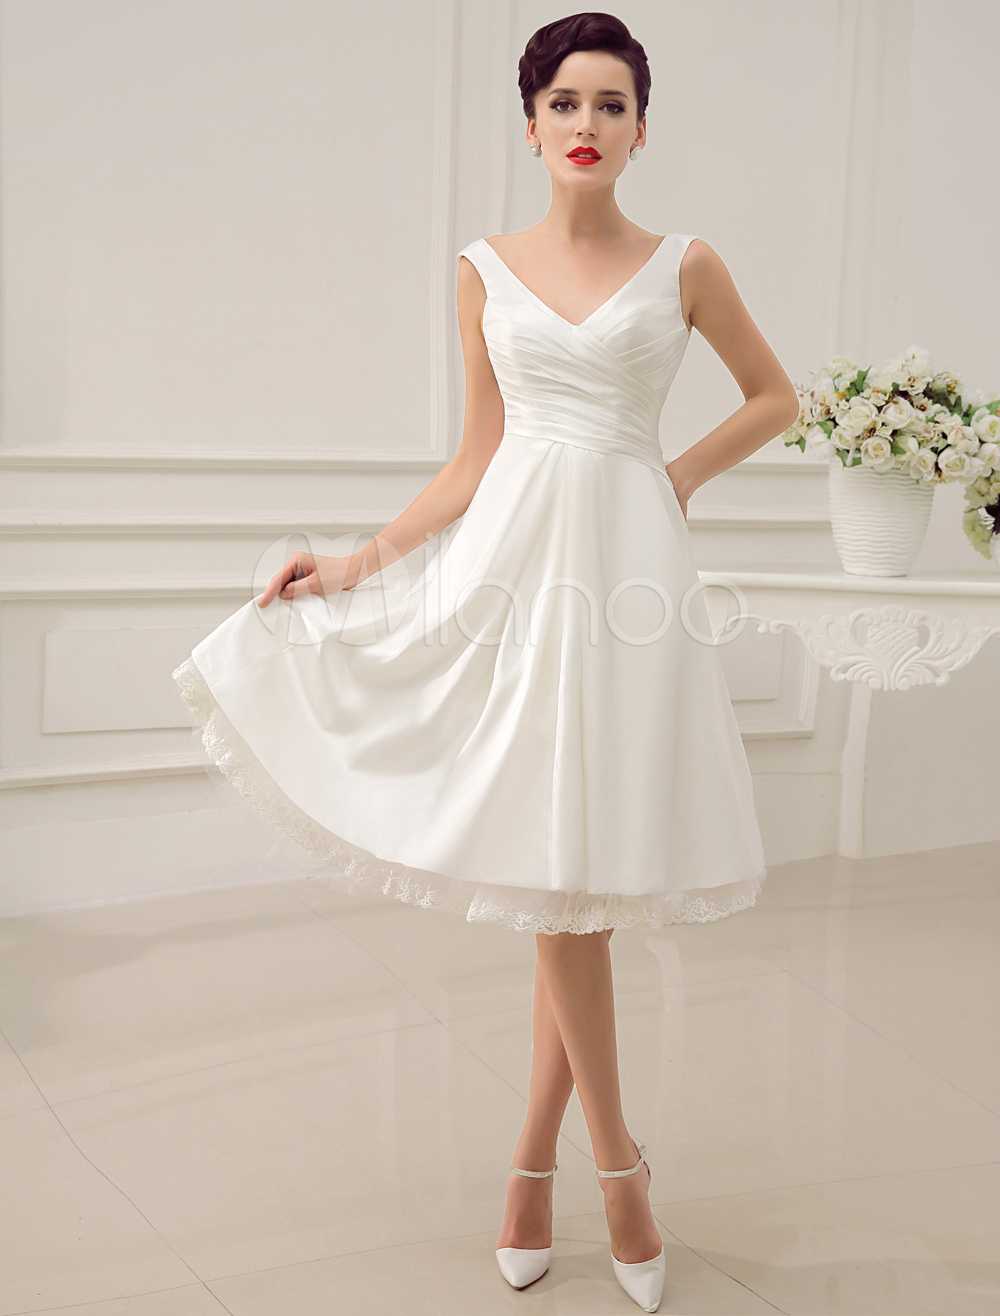 Ivory Wedding Dress Knee-Length Backless Straps Lace Wedding Gown ...